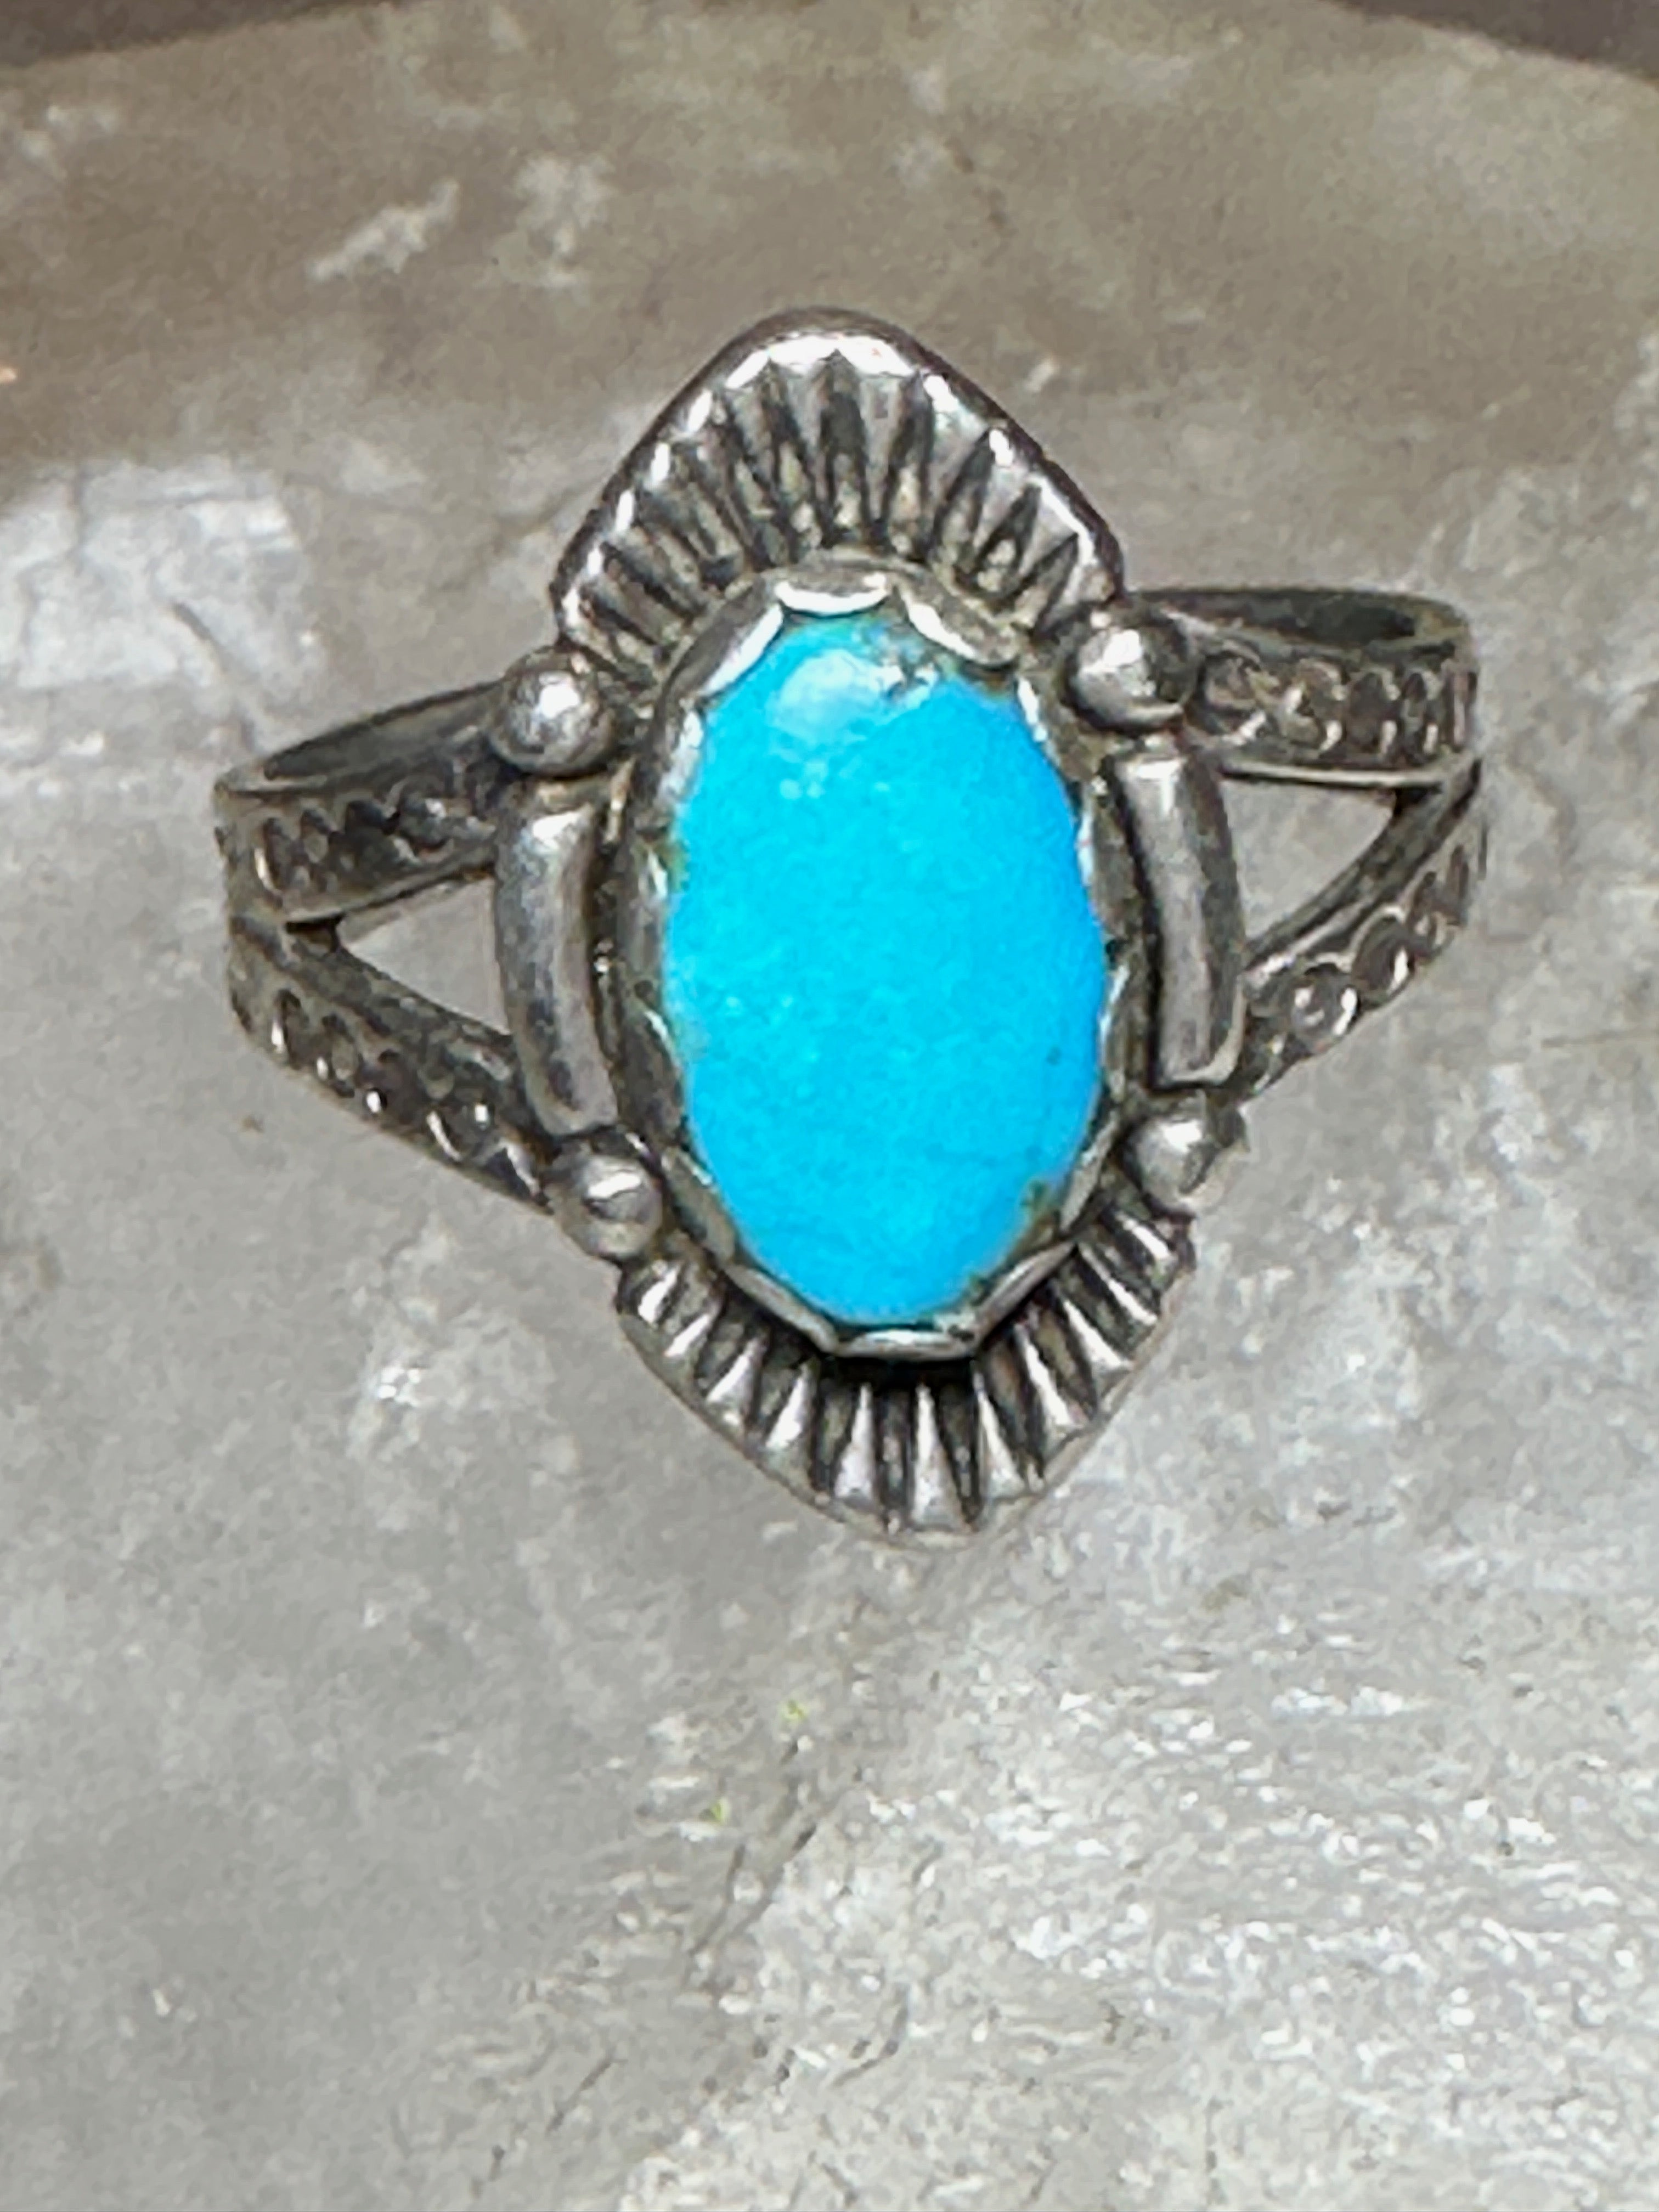 Vintage Silver Turquoise Shadowbox Ring,Sterling Stamped Southwest  Turquoise Ring Size 7.25, 1960s 925 Silver Turquoise Ring,Vintage Jewelry